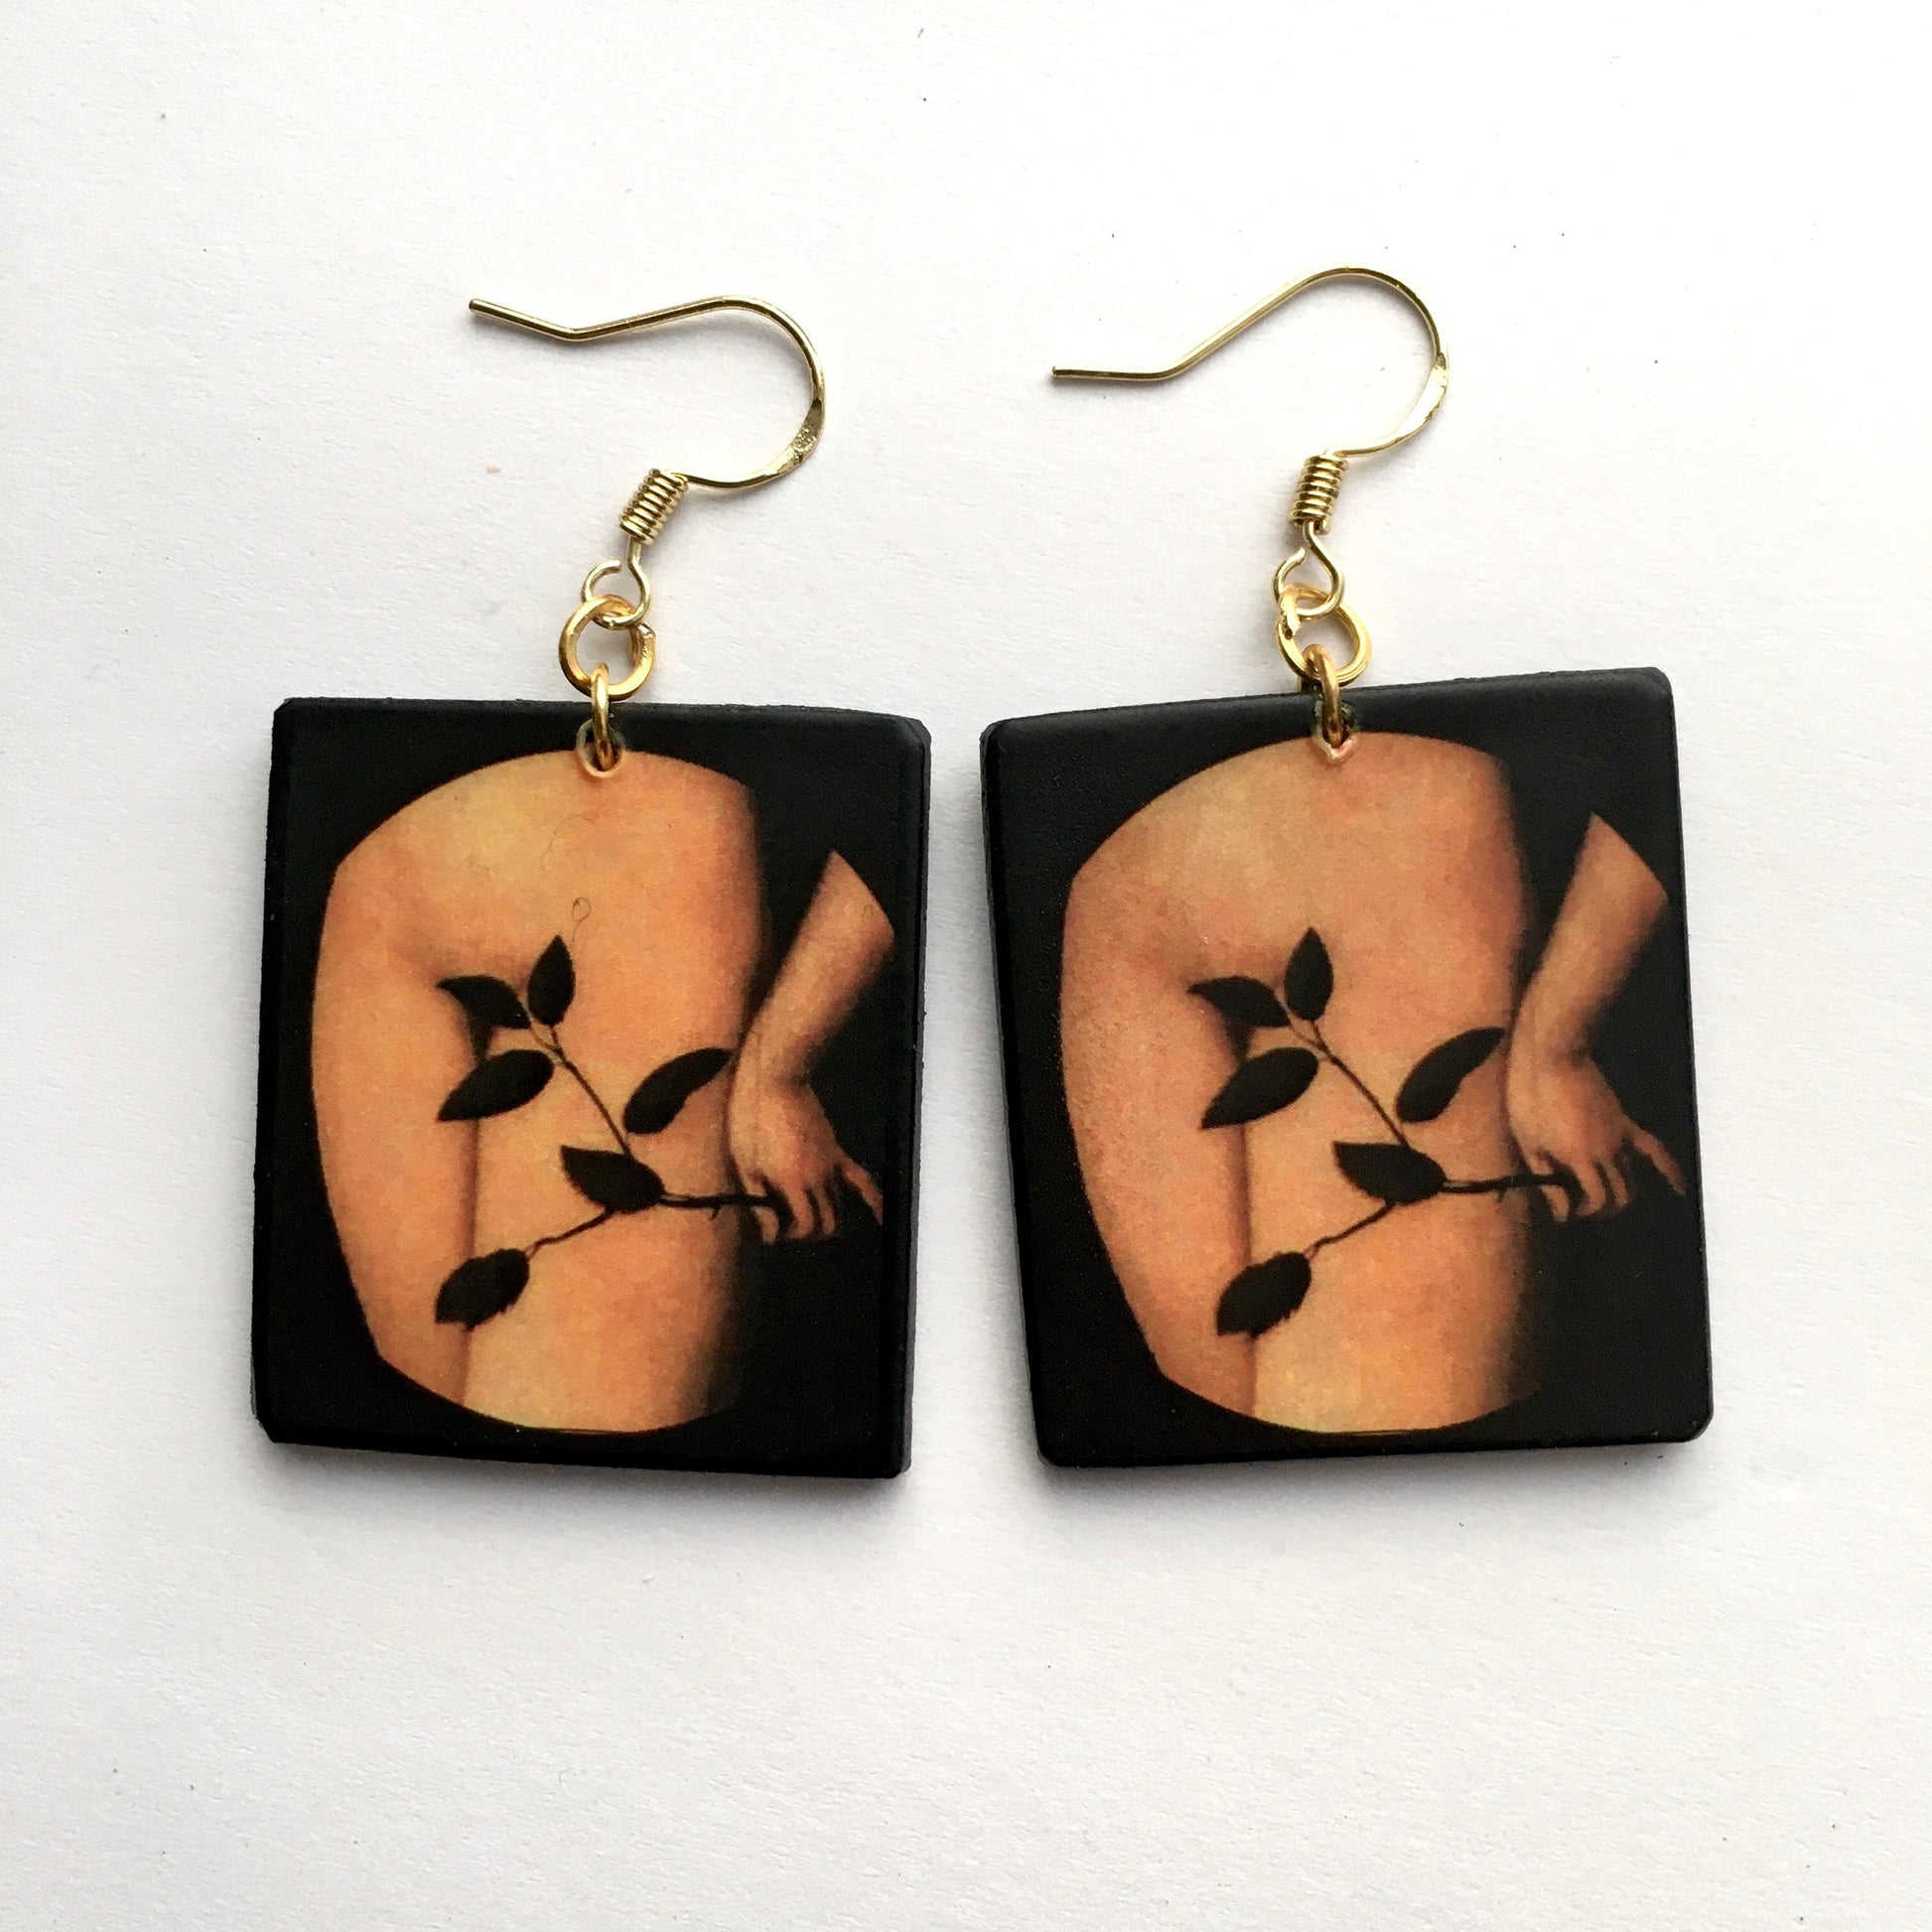 Eccentric artsy earrings, wood earrings with Renaissance famous painting Adam and Eva detail by artist Cranach.